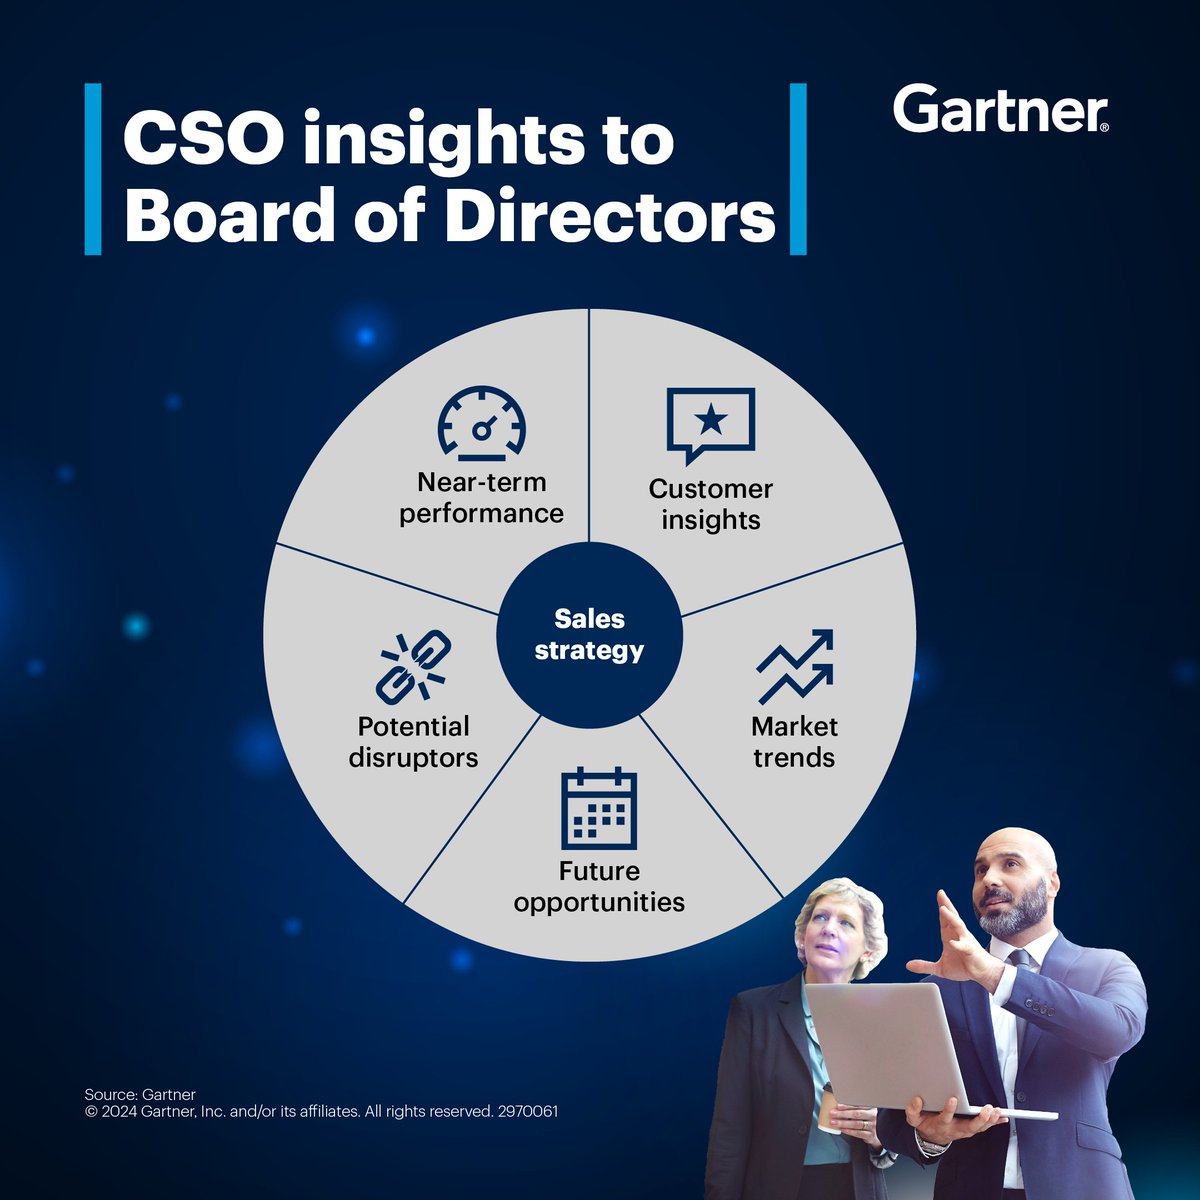 CSOs have a unique opportunity to gather direct customer feedback on their brand, product performance, service levels, and competition. Learn how to capitalize on it: gtnr.it/4bMlgSm #GartnerSales #CSO #SalesStrategy